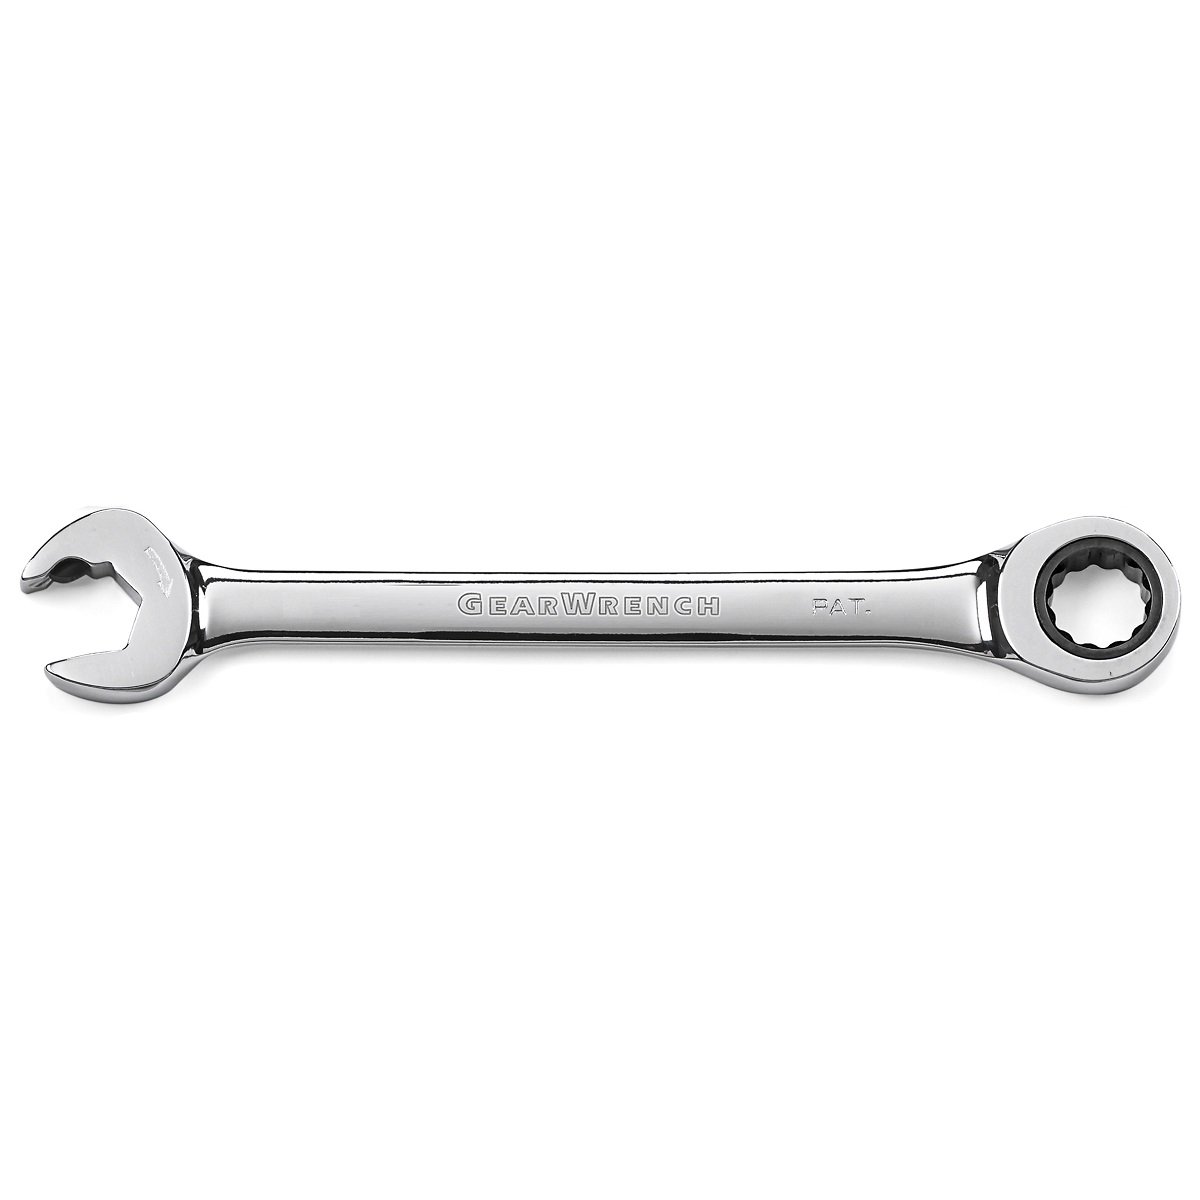 GearWrench Ratcheting Open End Combination Spanner Wrench 18mm 85518